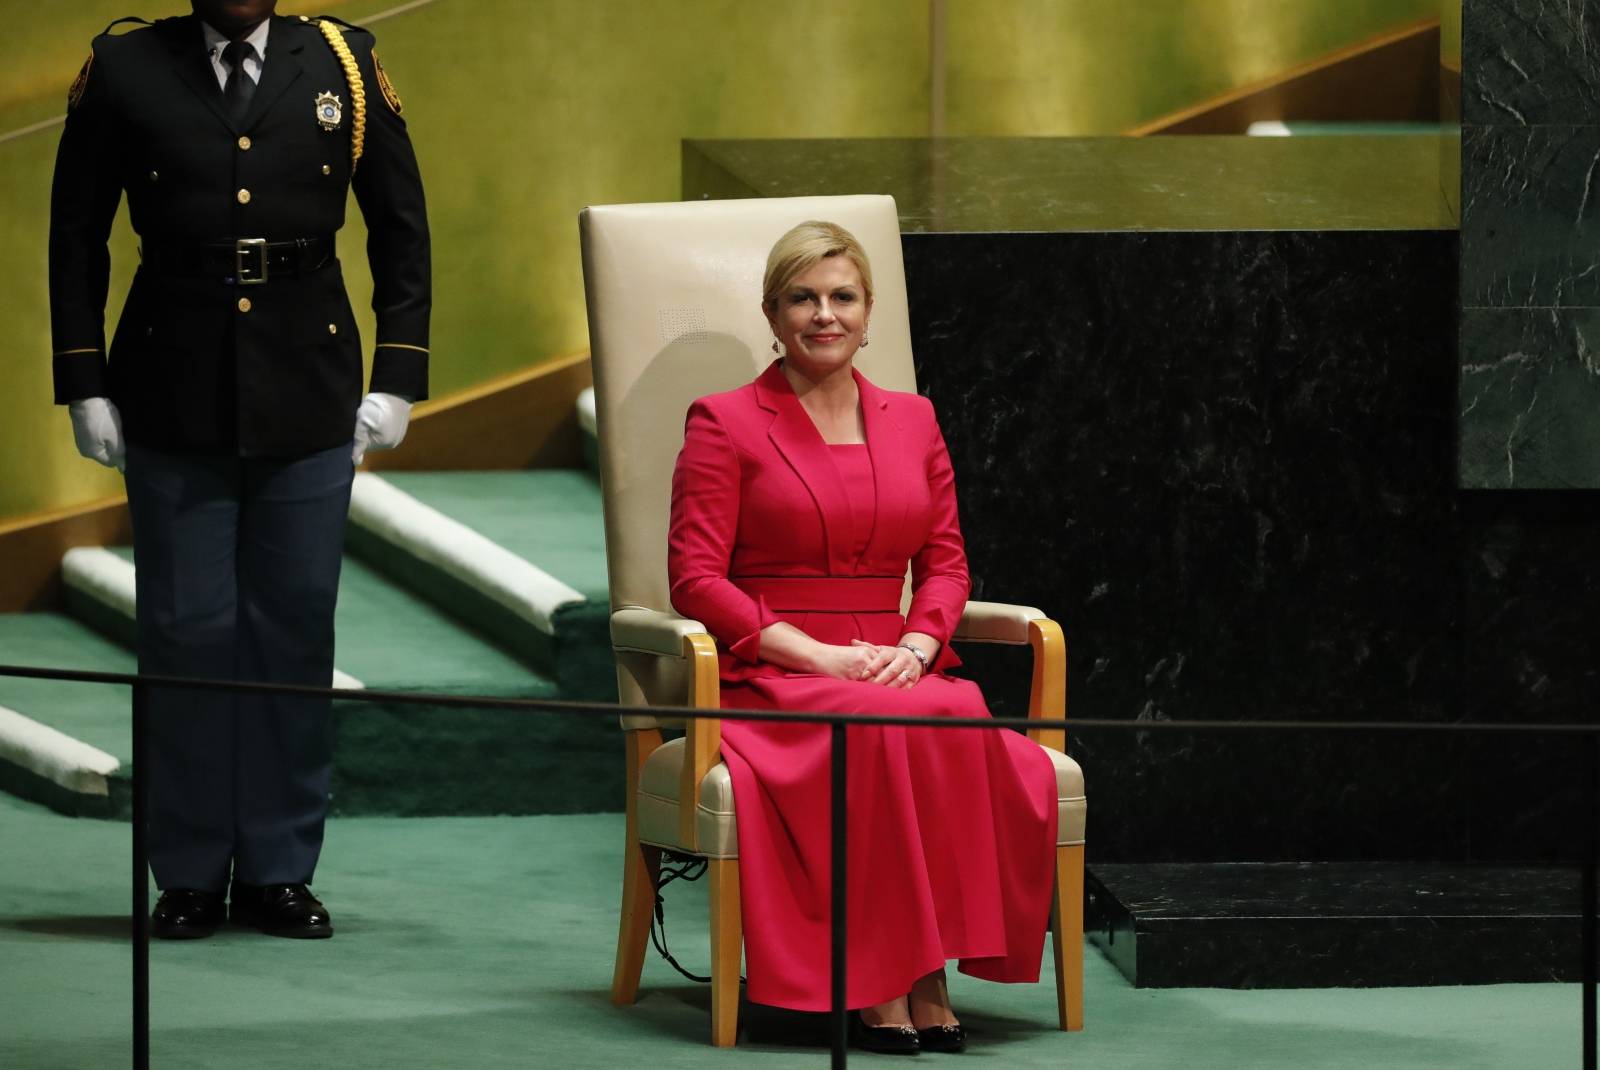 Croatia's President Kolinda Grabar-Kitarovic before addressing the 74th session of the United Nations General Assembly at U.N. headquarters in New York City, New York, U.S.